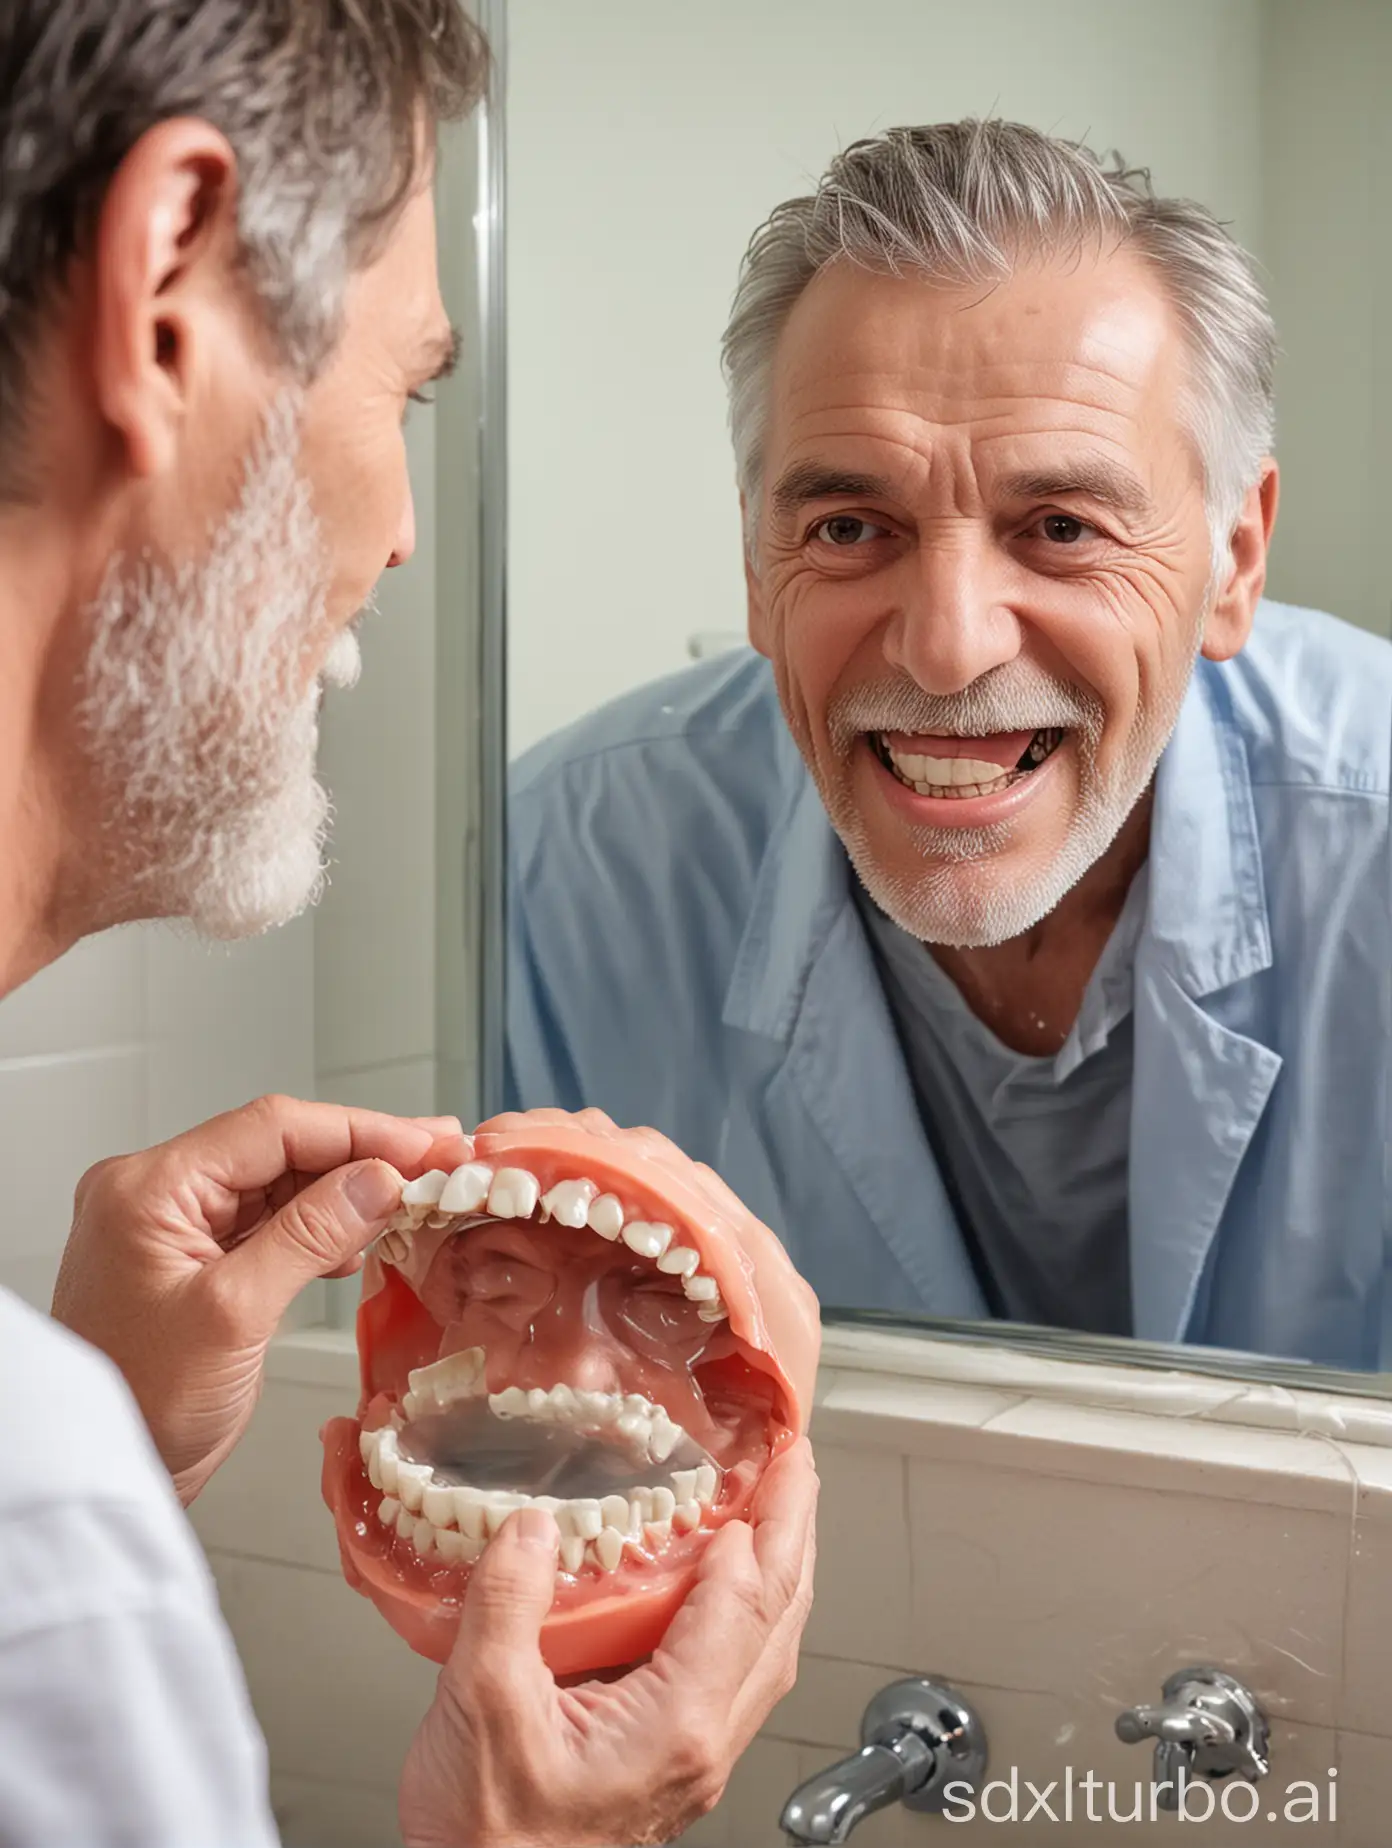 a man is washing his dentures before a mirror in a washroom, older man in mirror